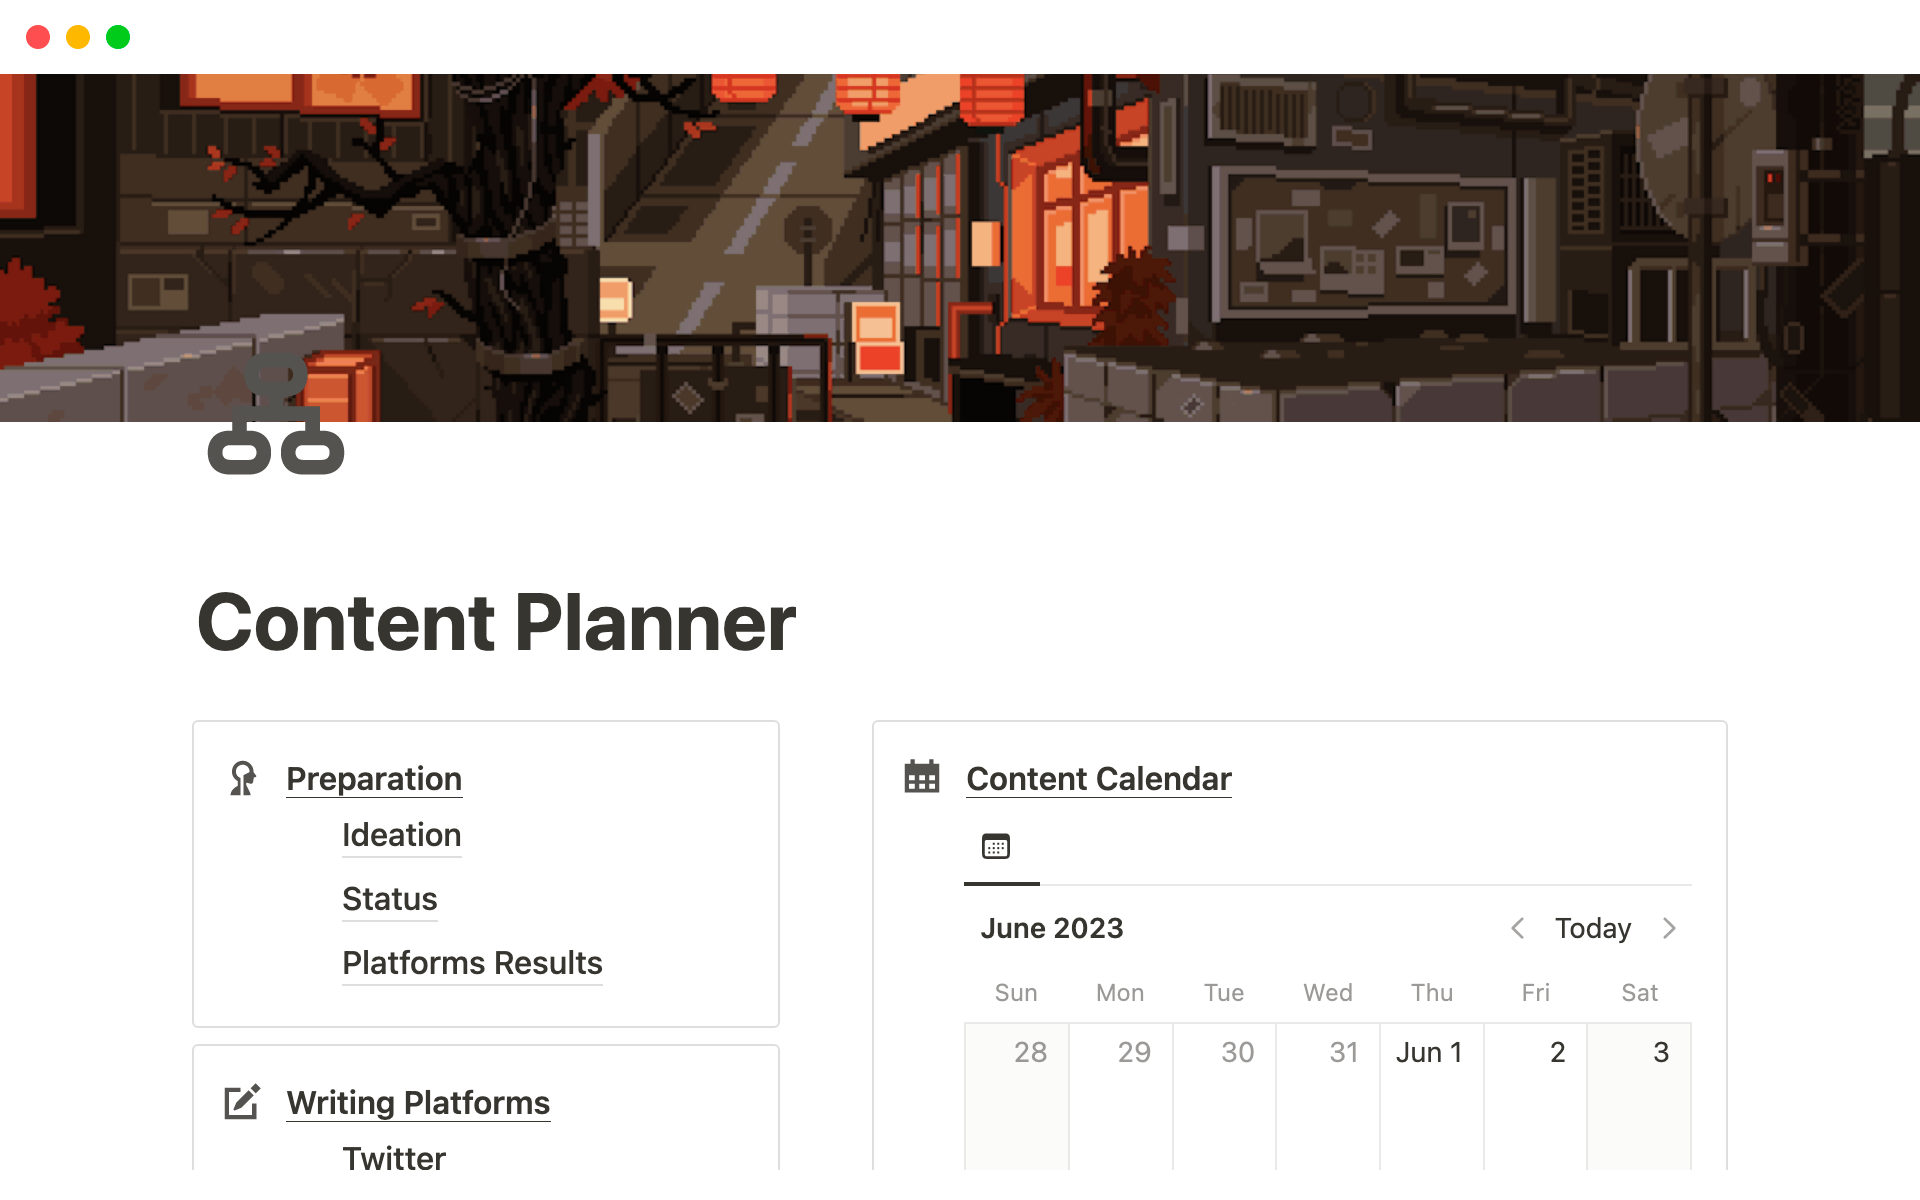 this template provides a powerful framework to organize your ideas, plan your content, and stay on track.